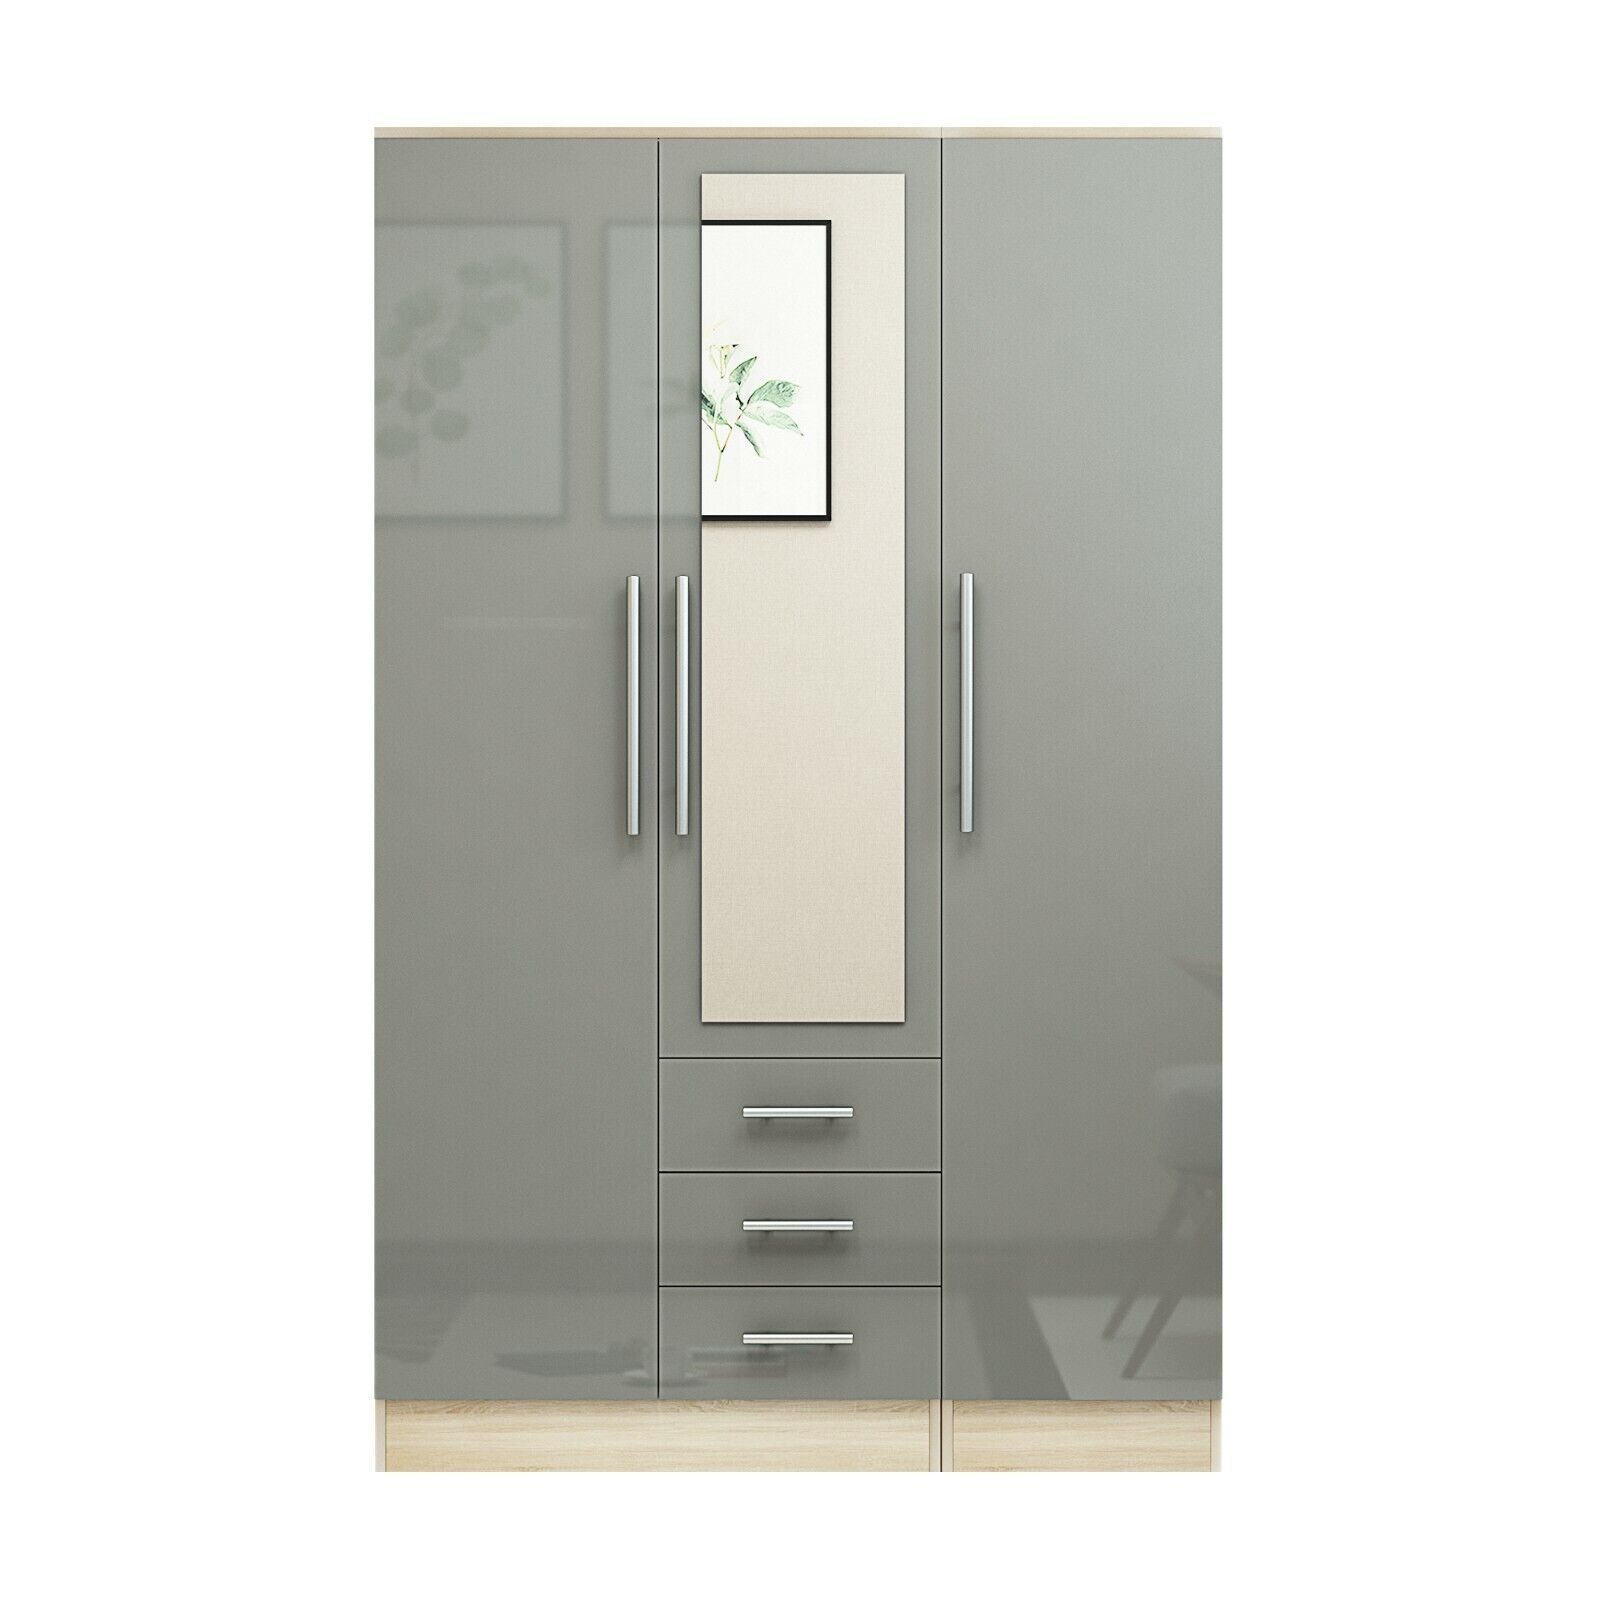 Unique 3 Door Combi Mirrored Wardrobe, 3 Drawers, In High Gloss  Grey/black/white | Ebay For 3 Doors Wardrobes With Mirror (View 5 of 15)